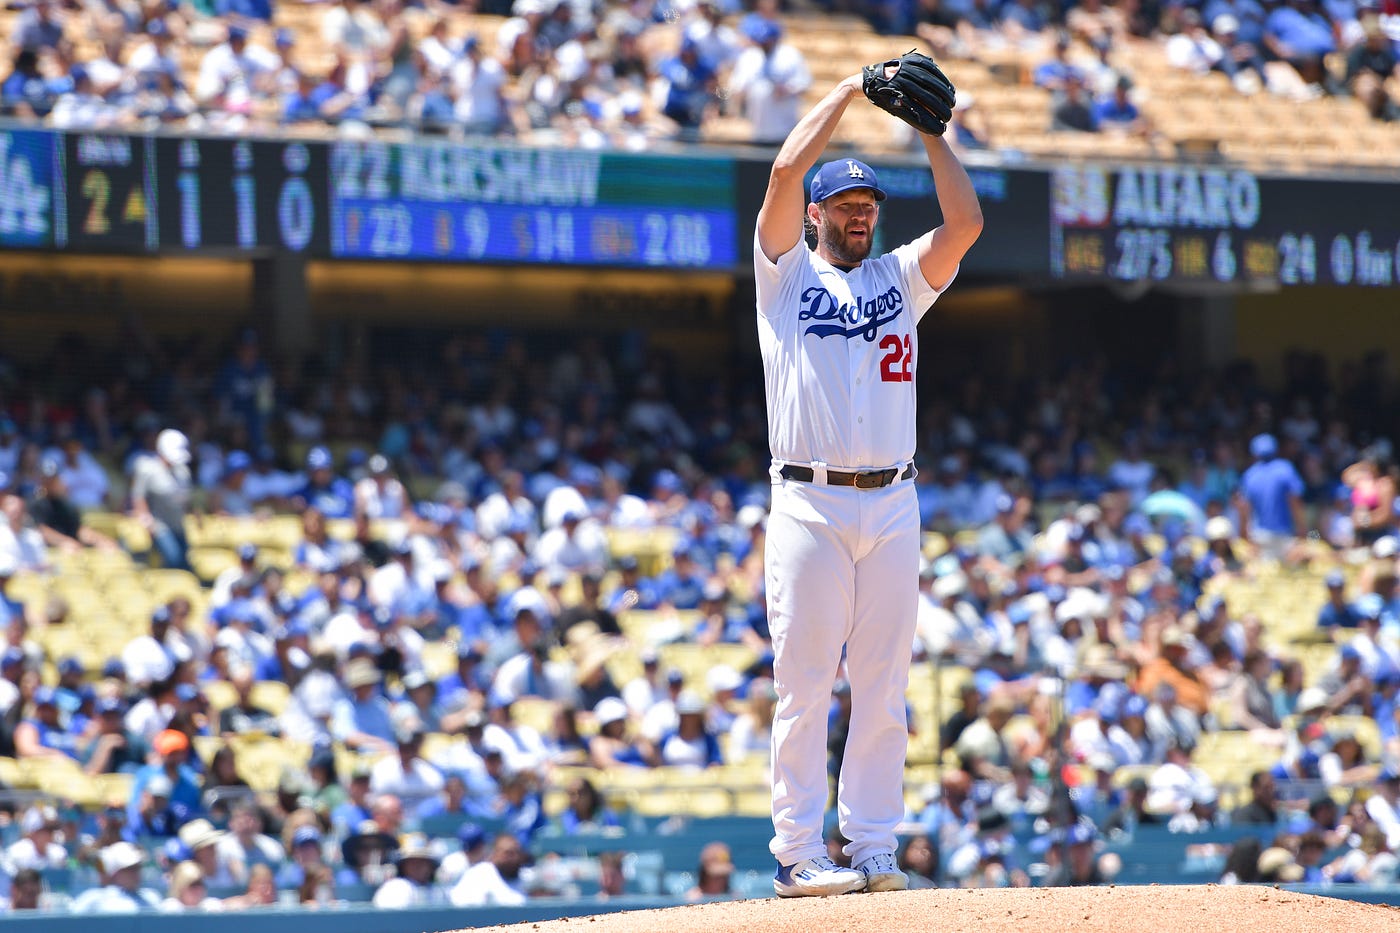 Kershaw leads Dodgers to the doorstep of a sweep before Padres come alive  late, by Cary Osborne